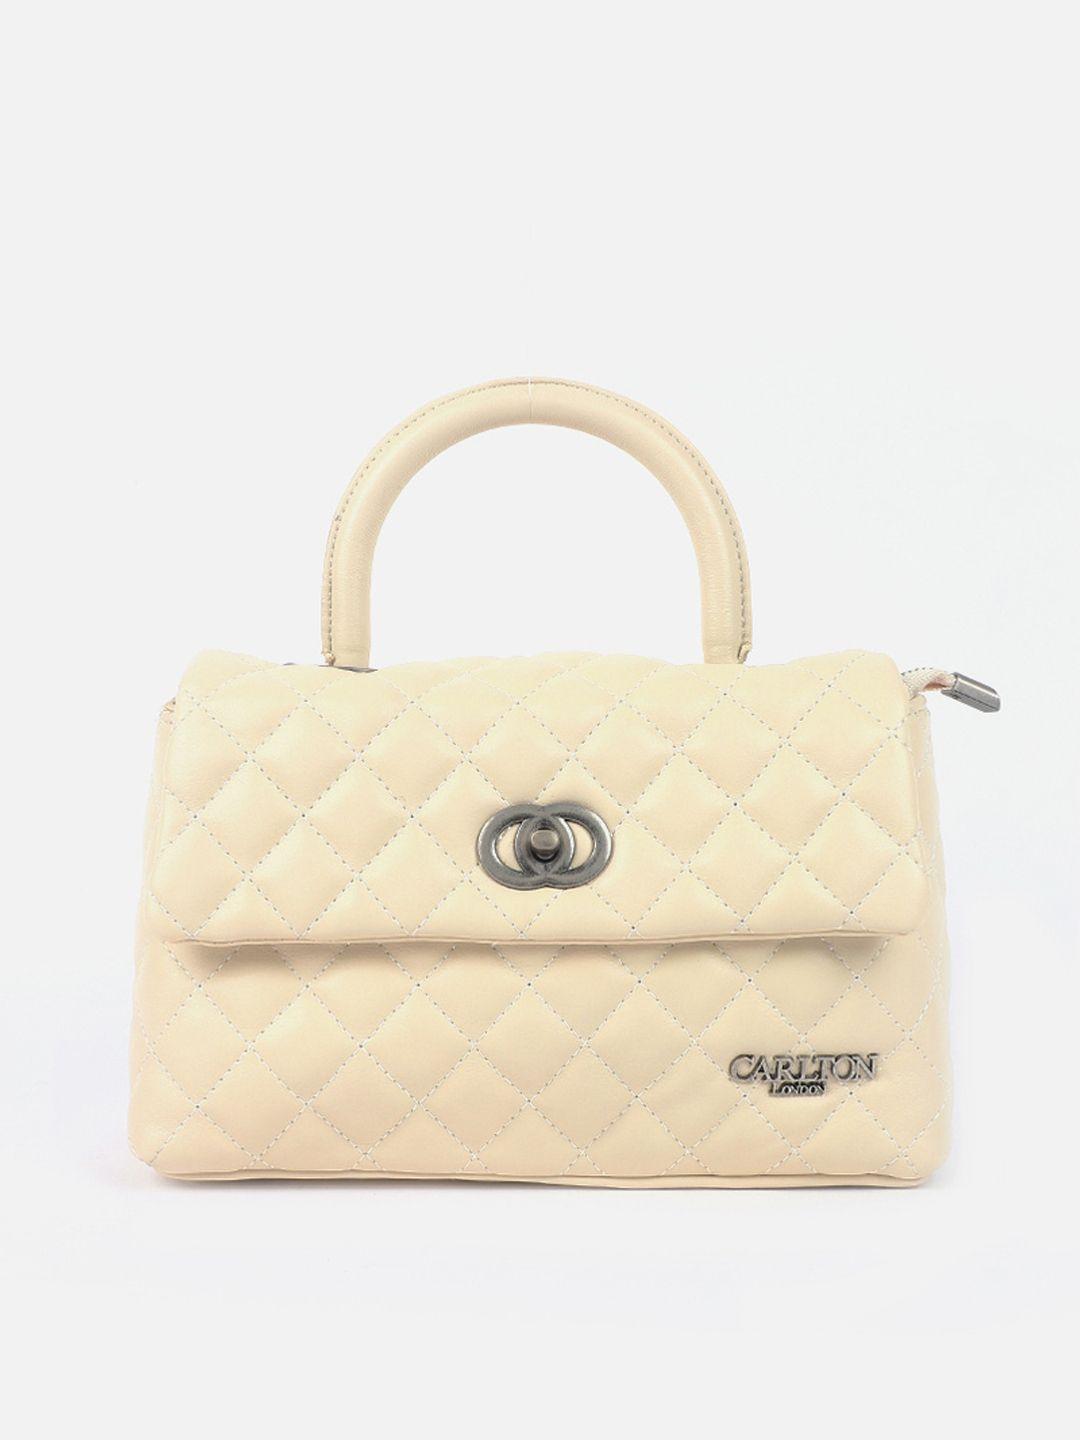 carlton london textured structured satchel handbag with quilted